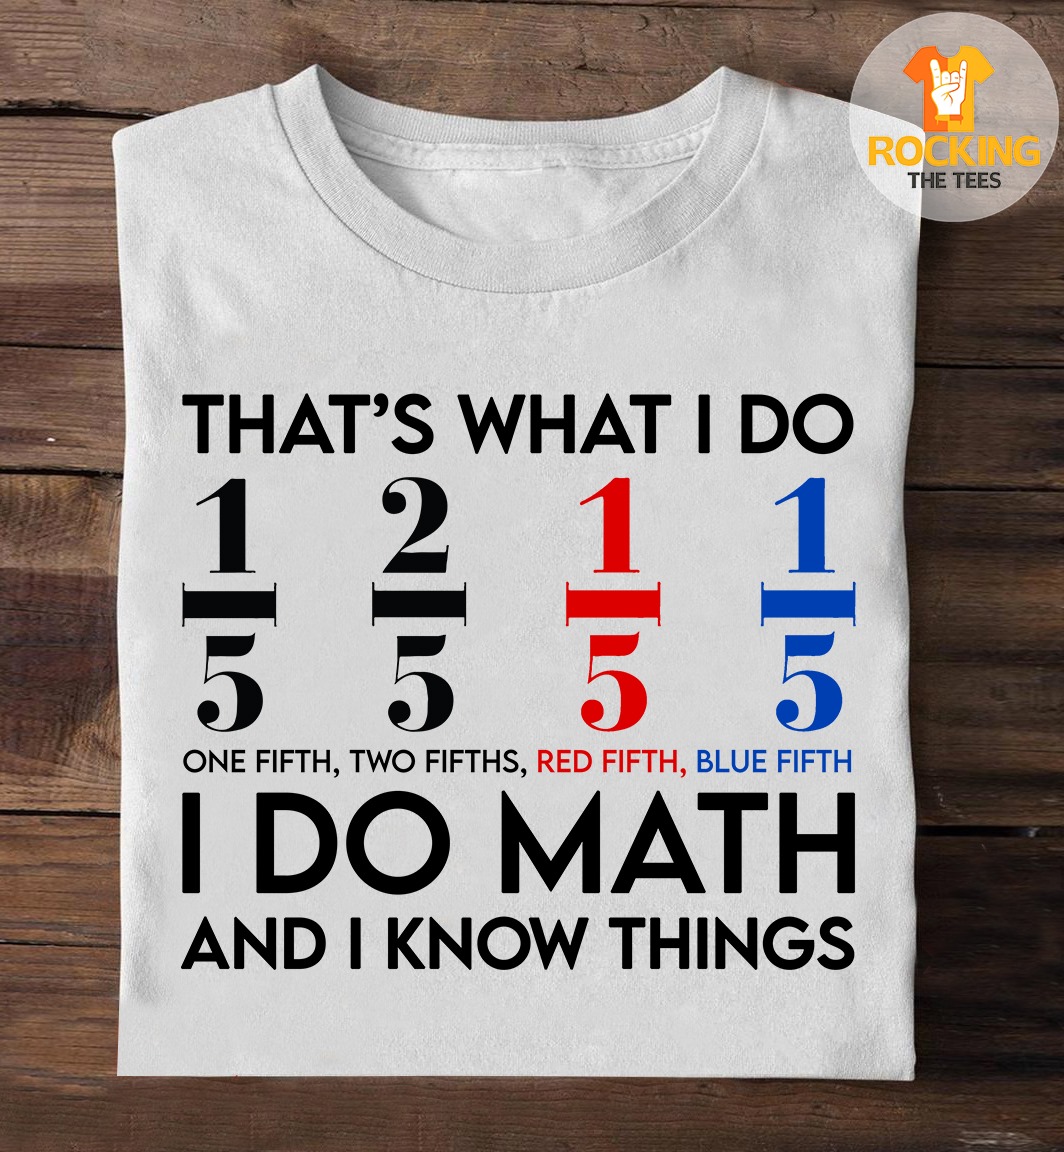 That's what I do I do math and I know things